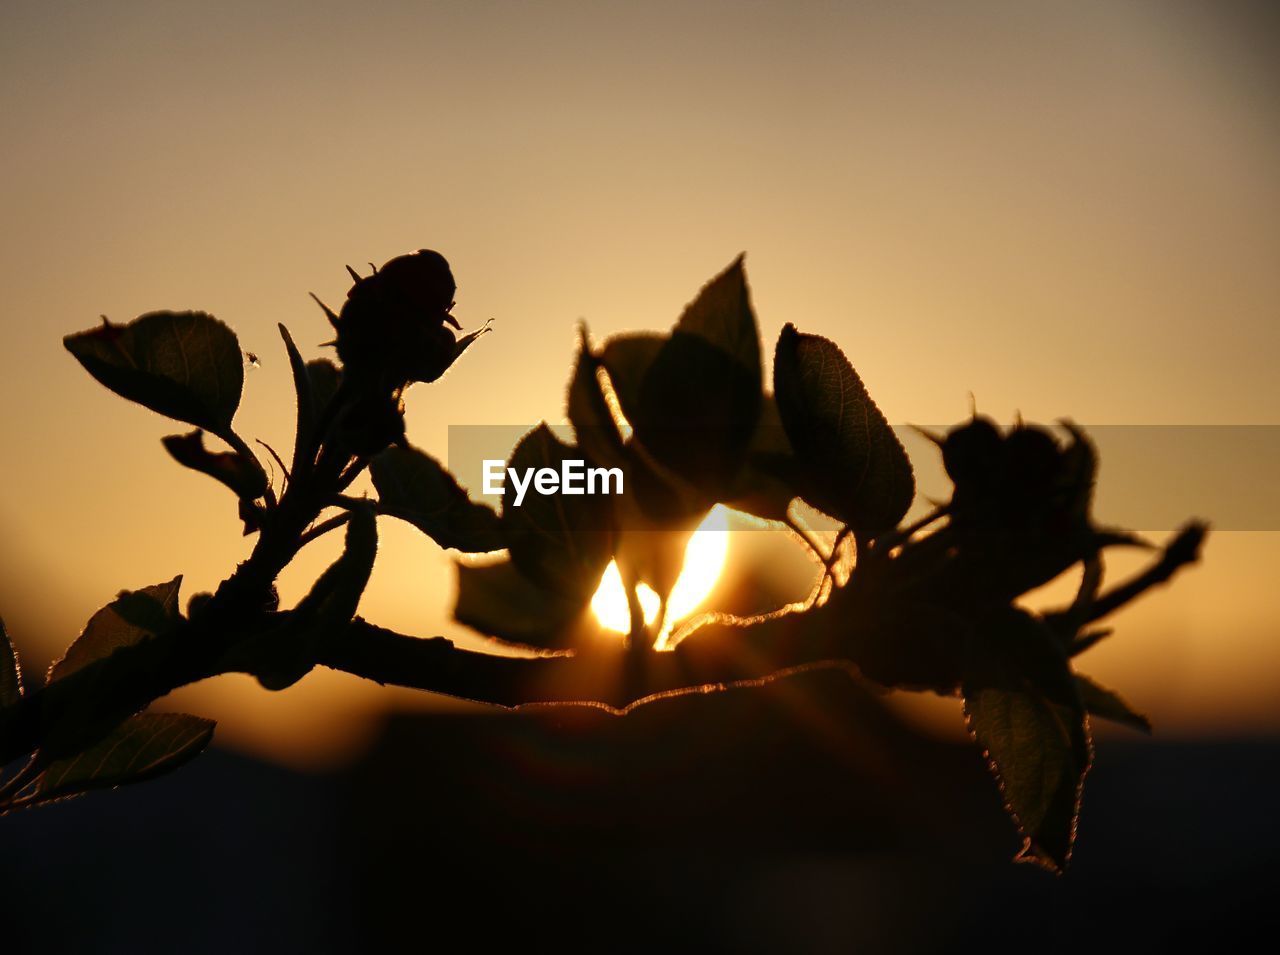 CLOSE-UP OF SILHOUETTE LEAVES AGAINST SKY AT SUNSET